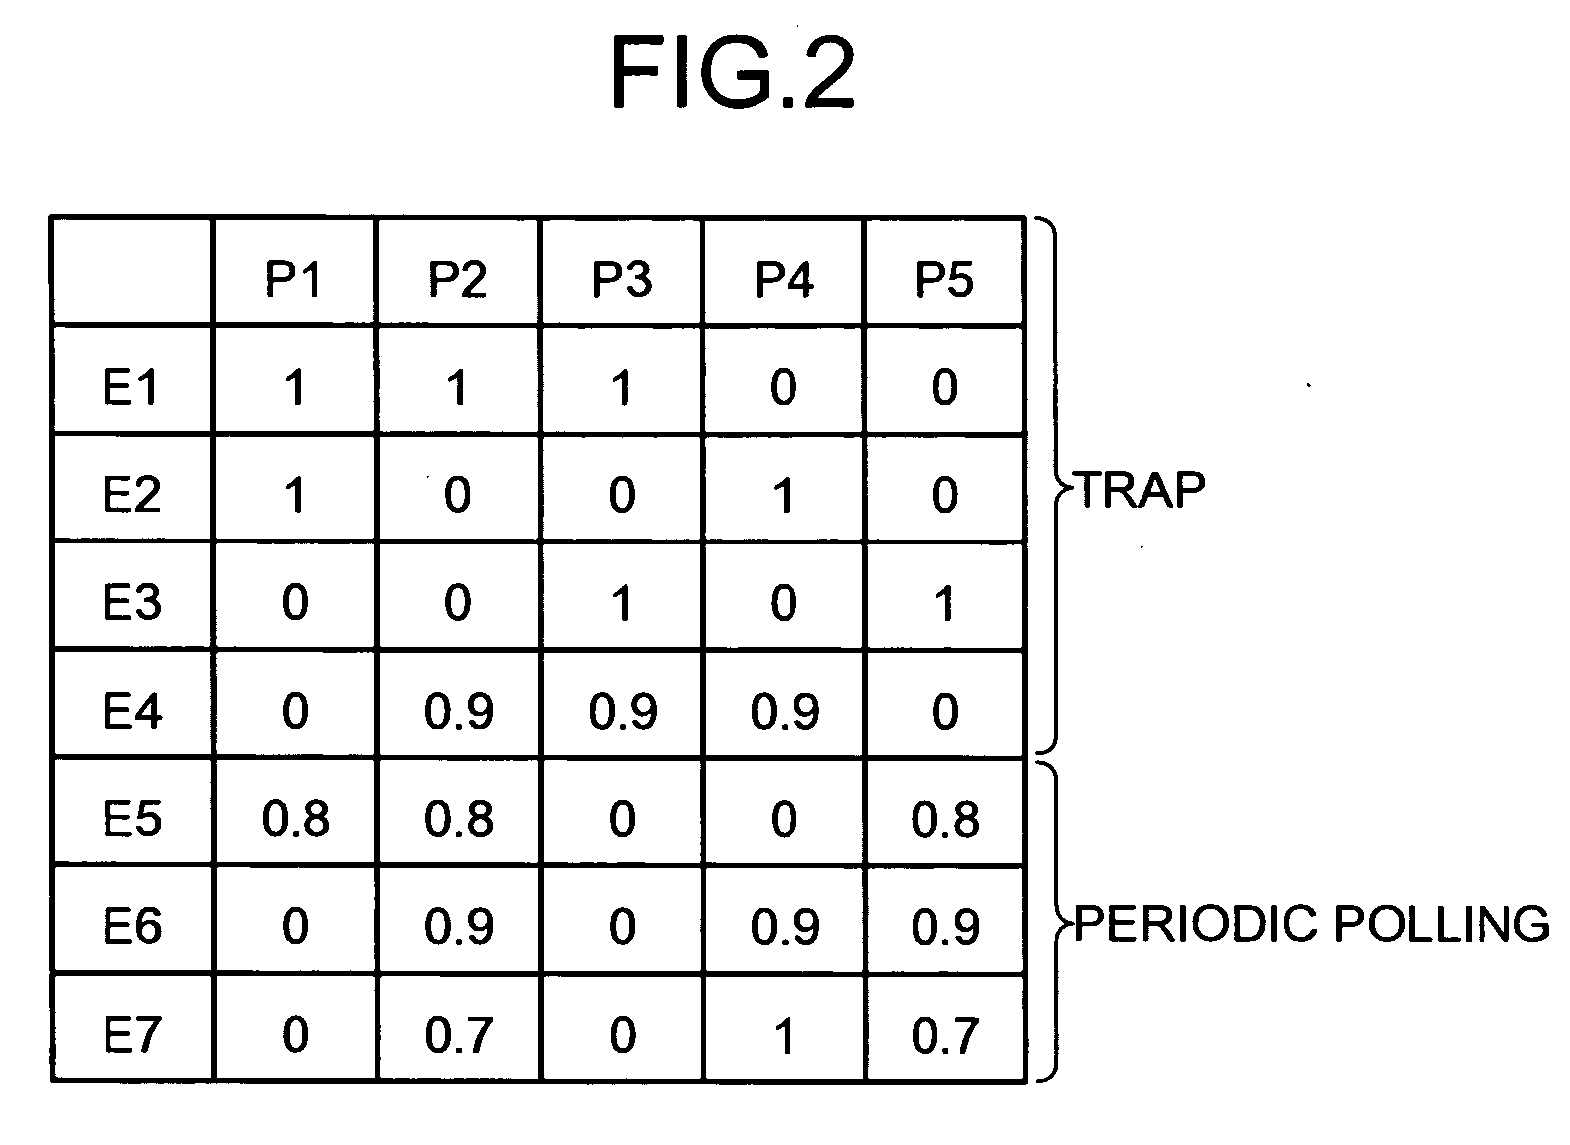 Network fault diagnostic device, network fault diagnostic method, and computer product